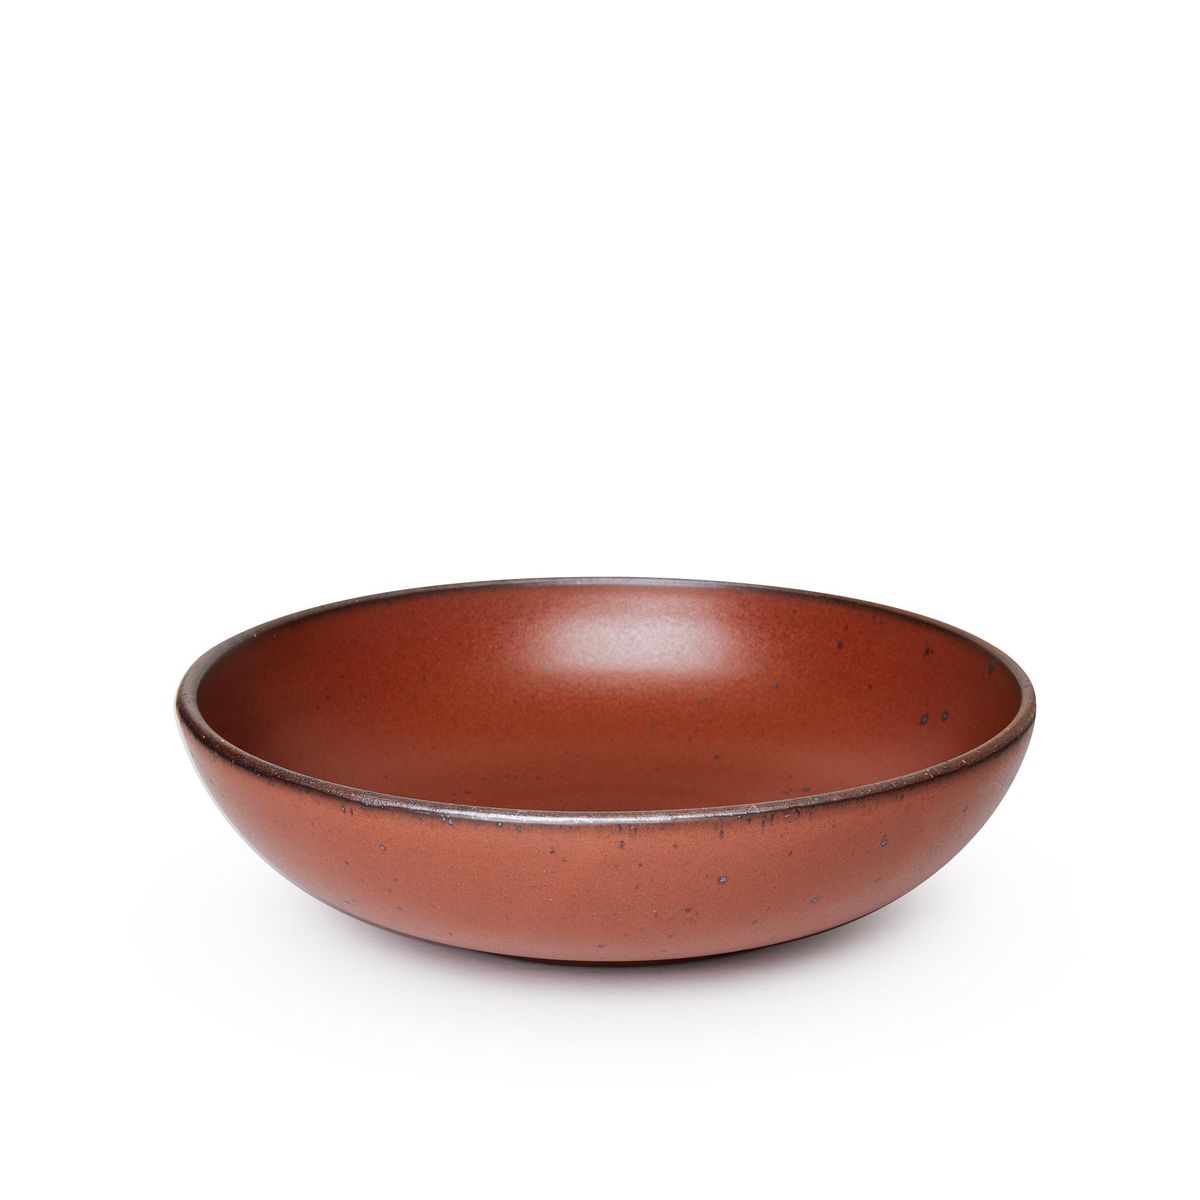 A large shallow serving ceramic bowl in a cool burnt terracotta color featuring iron speckles and an unglazed rim